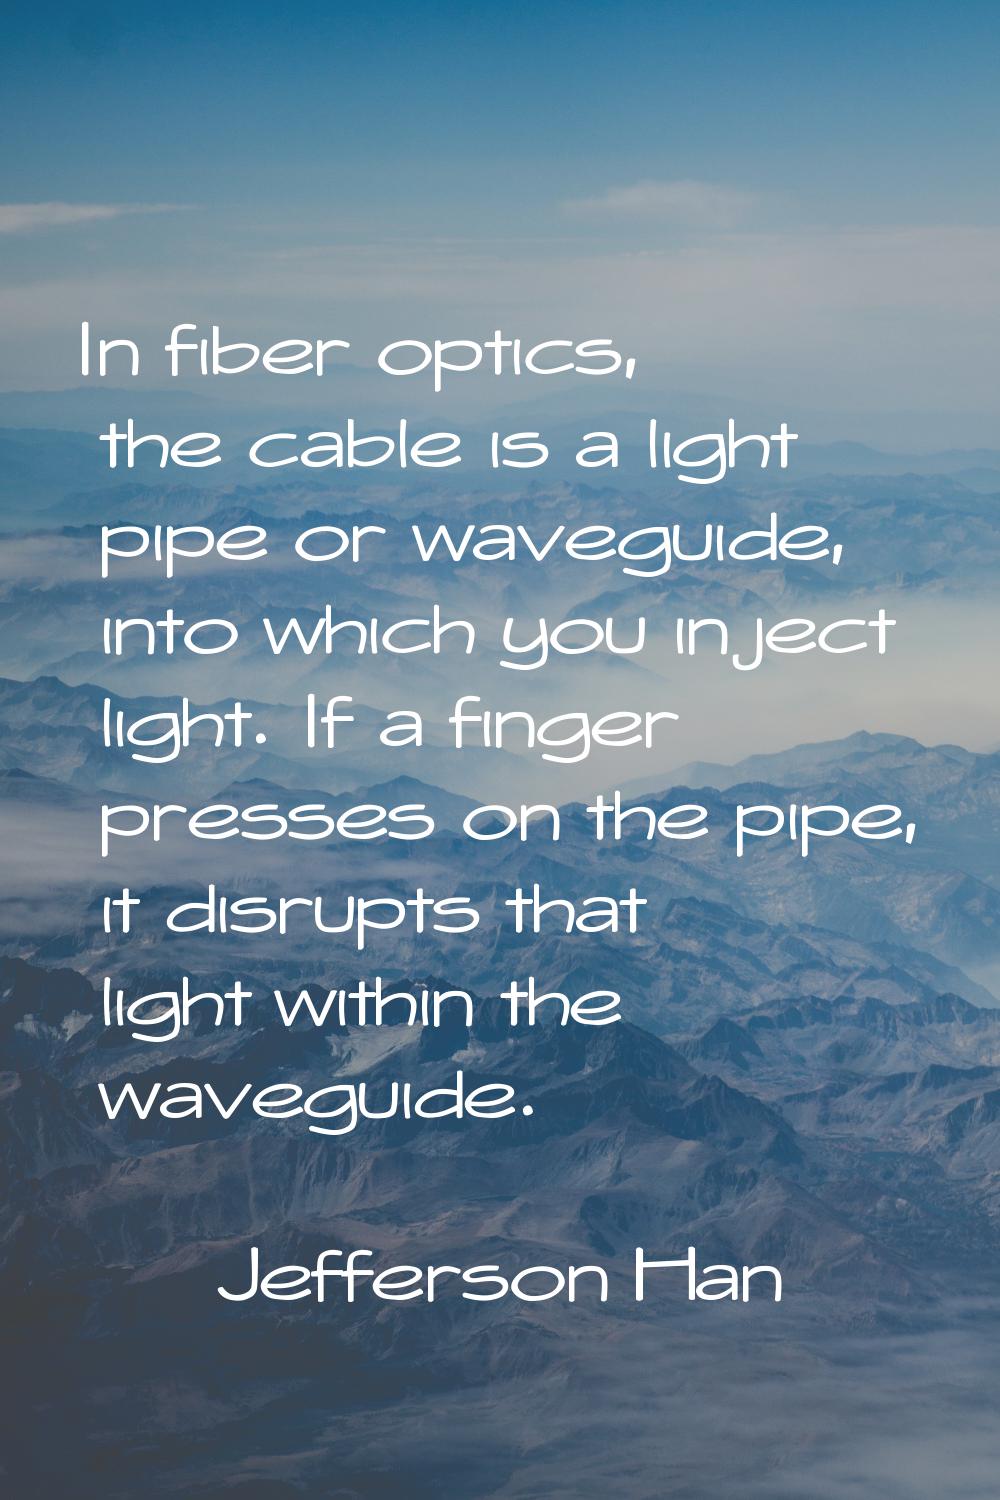 In fiber optics, the cable is a light pipe or waveguide, into which you inject light. If a finger p